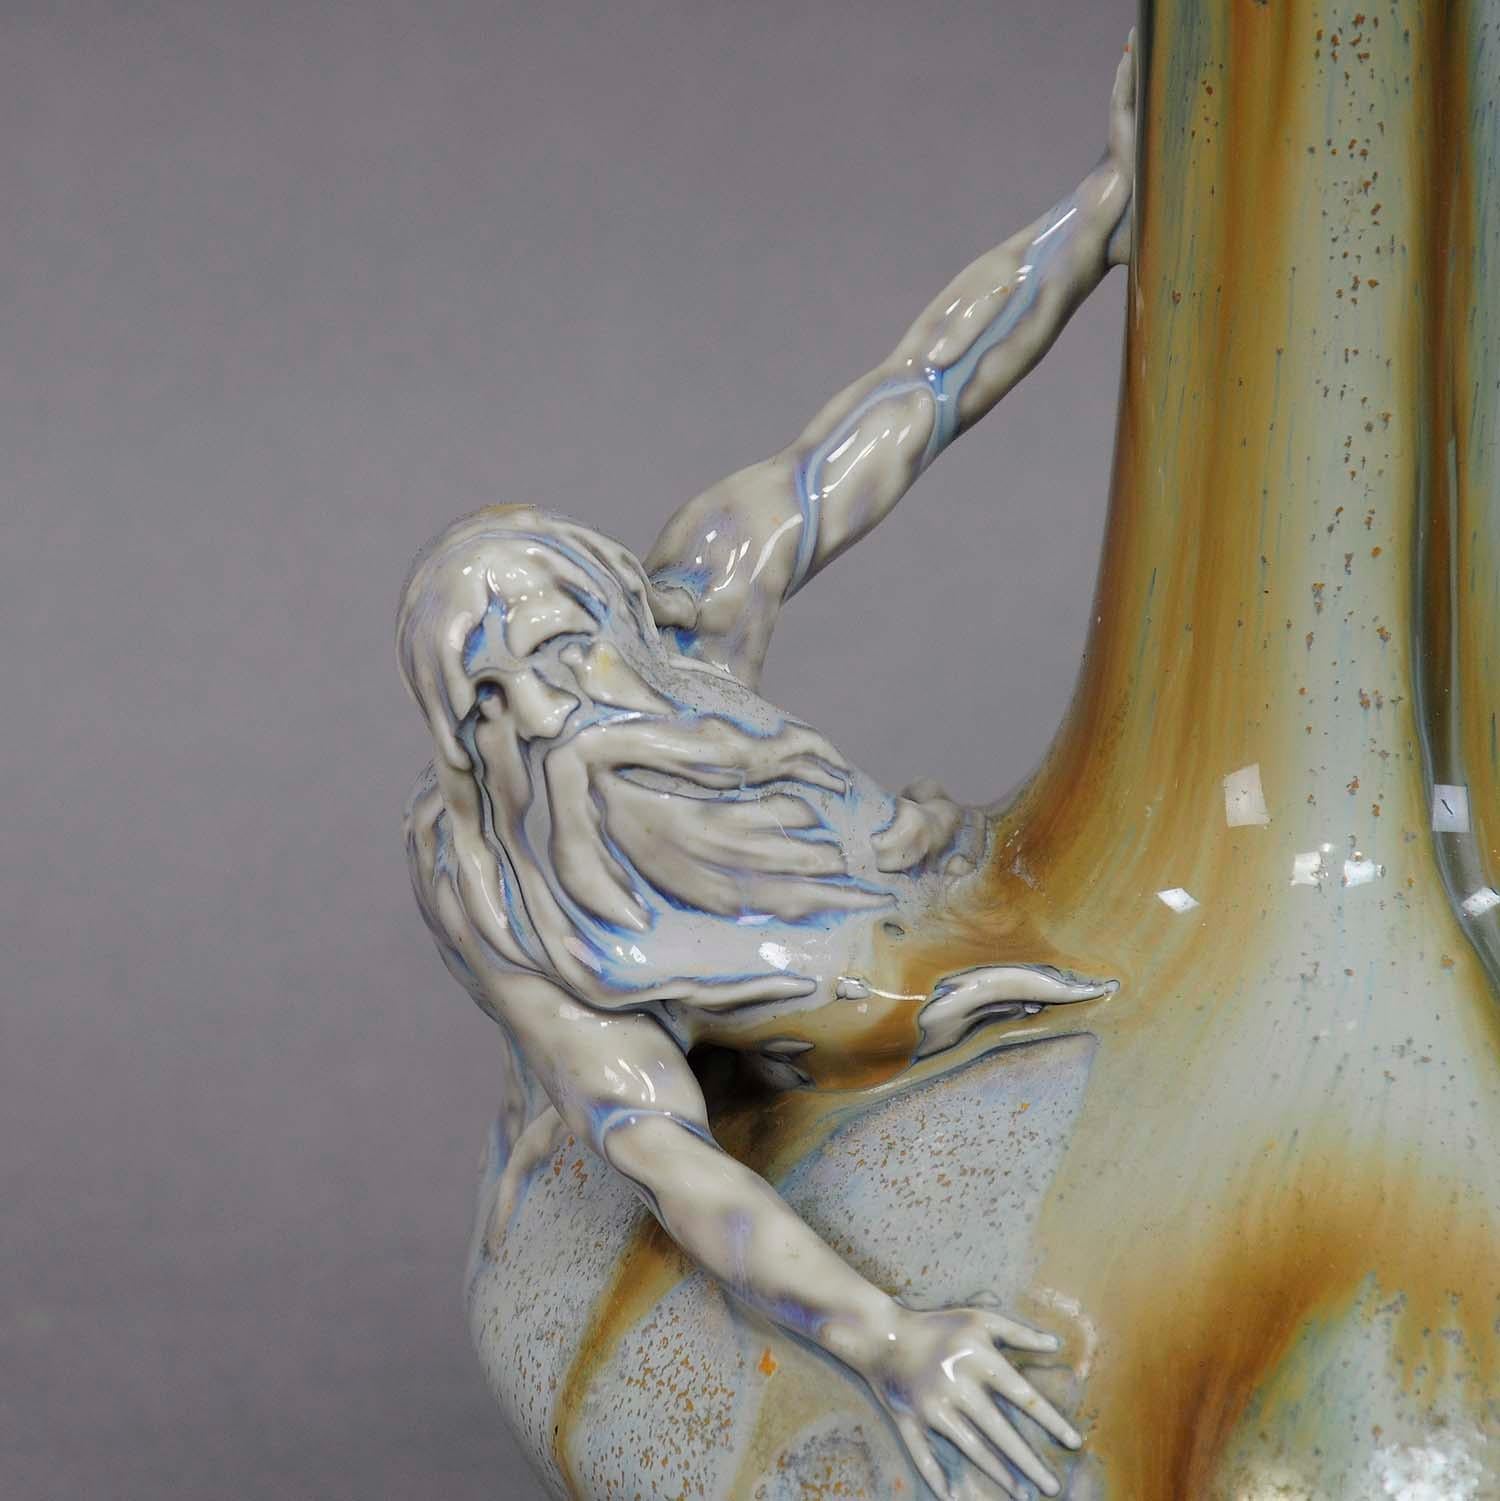 A nice antique porcellaine vase in typical Art Nouveau style. With a protruding Neptun sculpture on the body. With blue and brown glaces. Manufactured by Schierholz & Son, Plaue, Germany ca. 1900.

Measures: height: 8.86